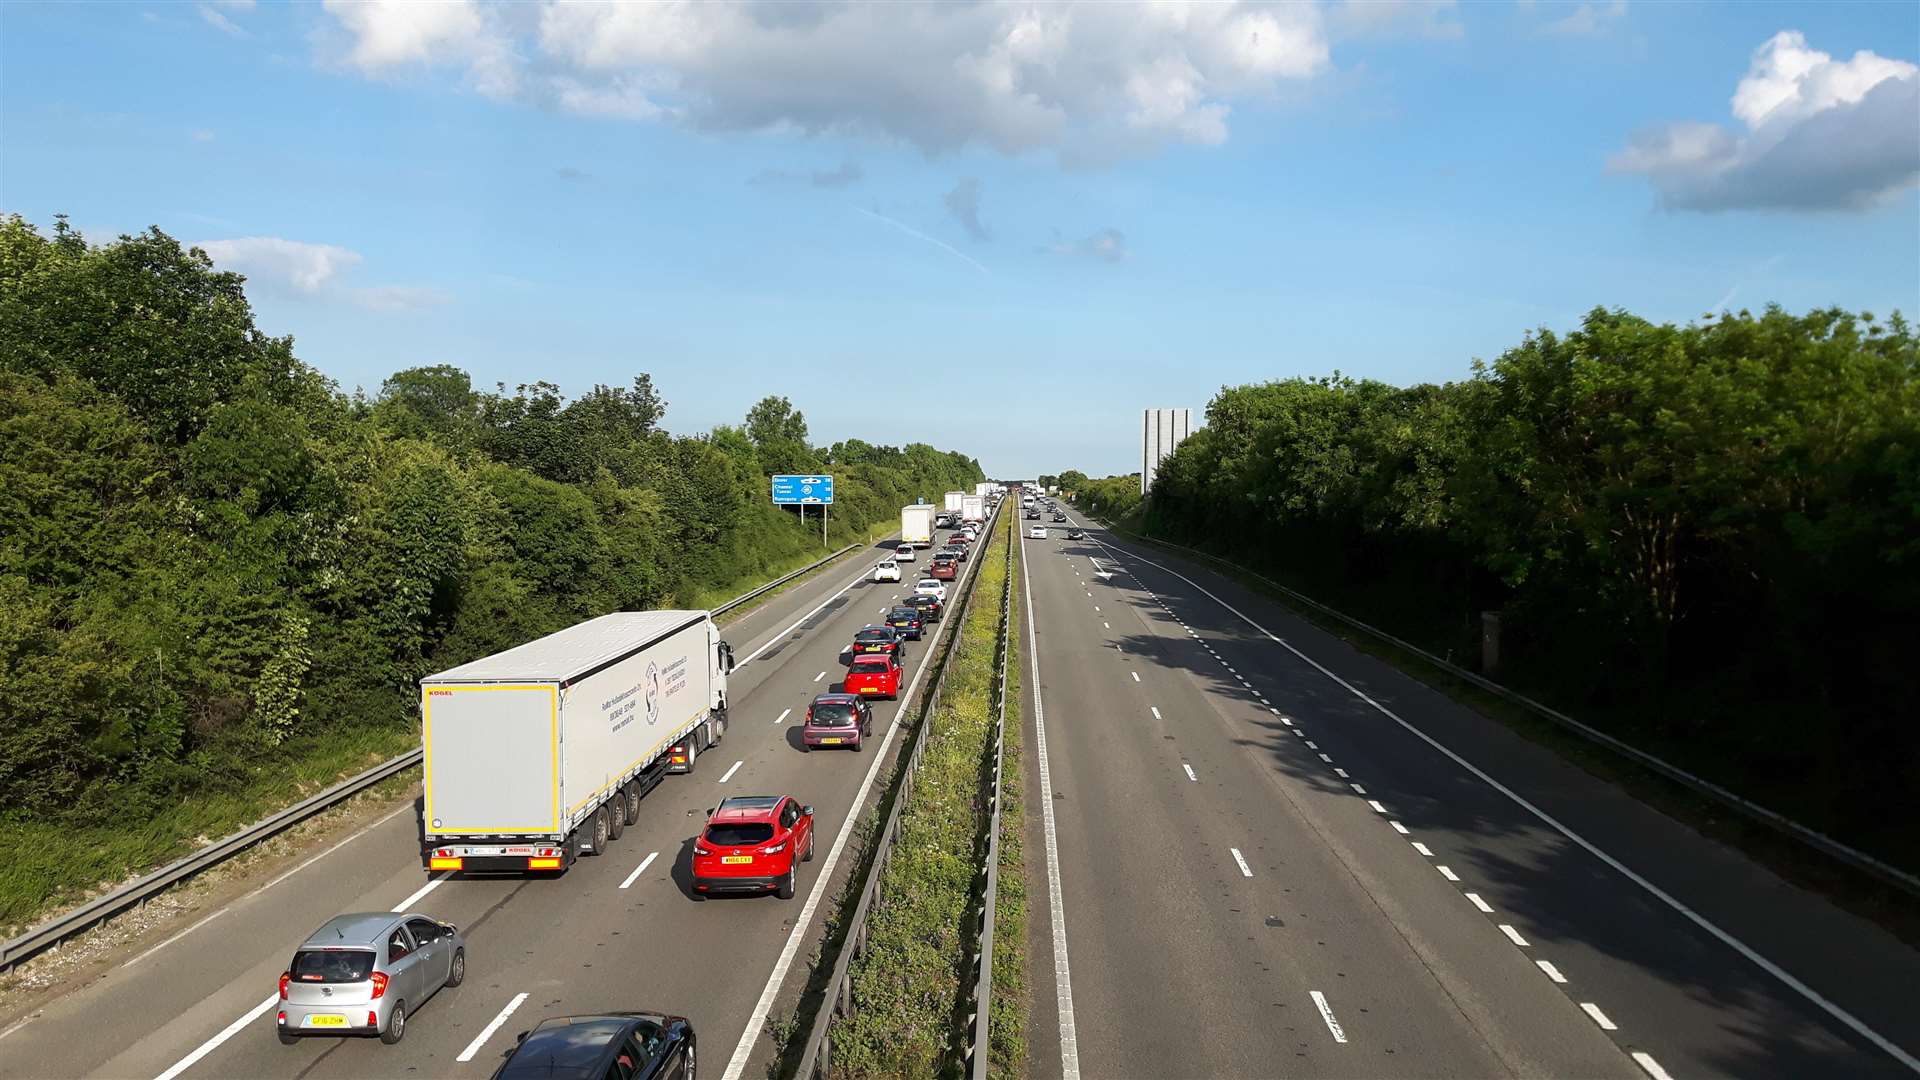 A crash caused delays on the coastbound M2 between Sittingbourne and Faversham